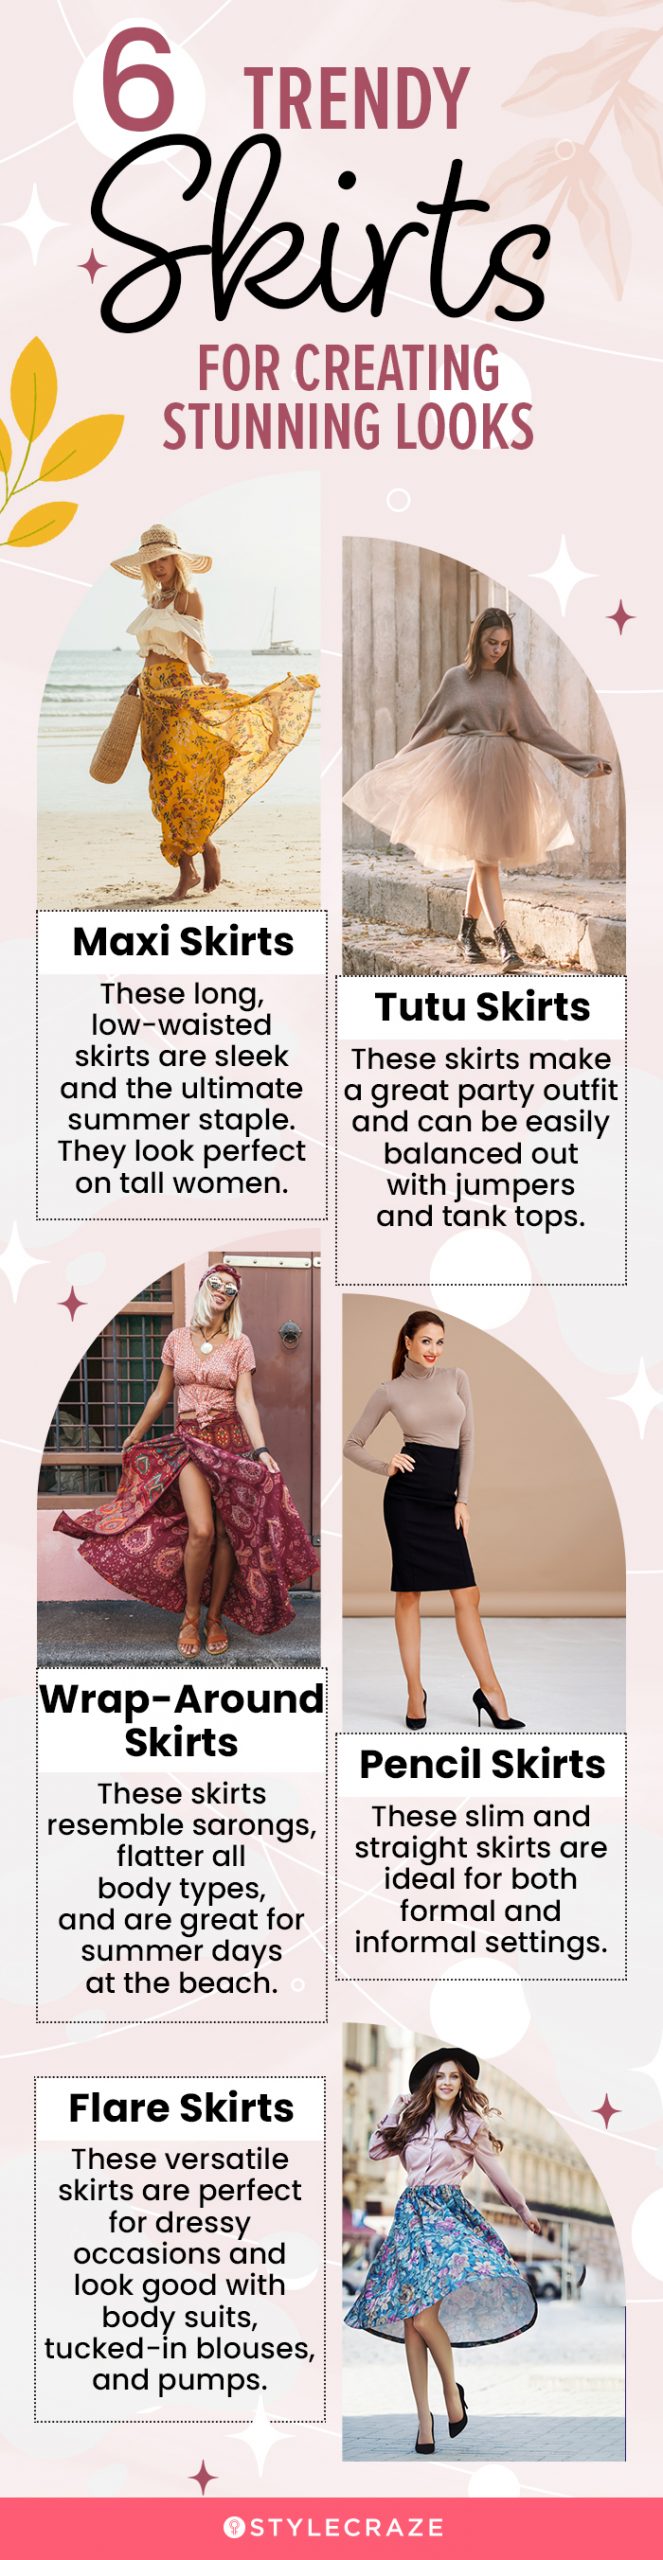 5 trendiest skirts for the ultimate stunning look (infographic)